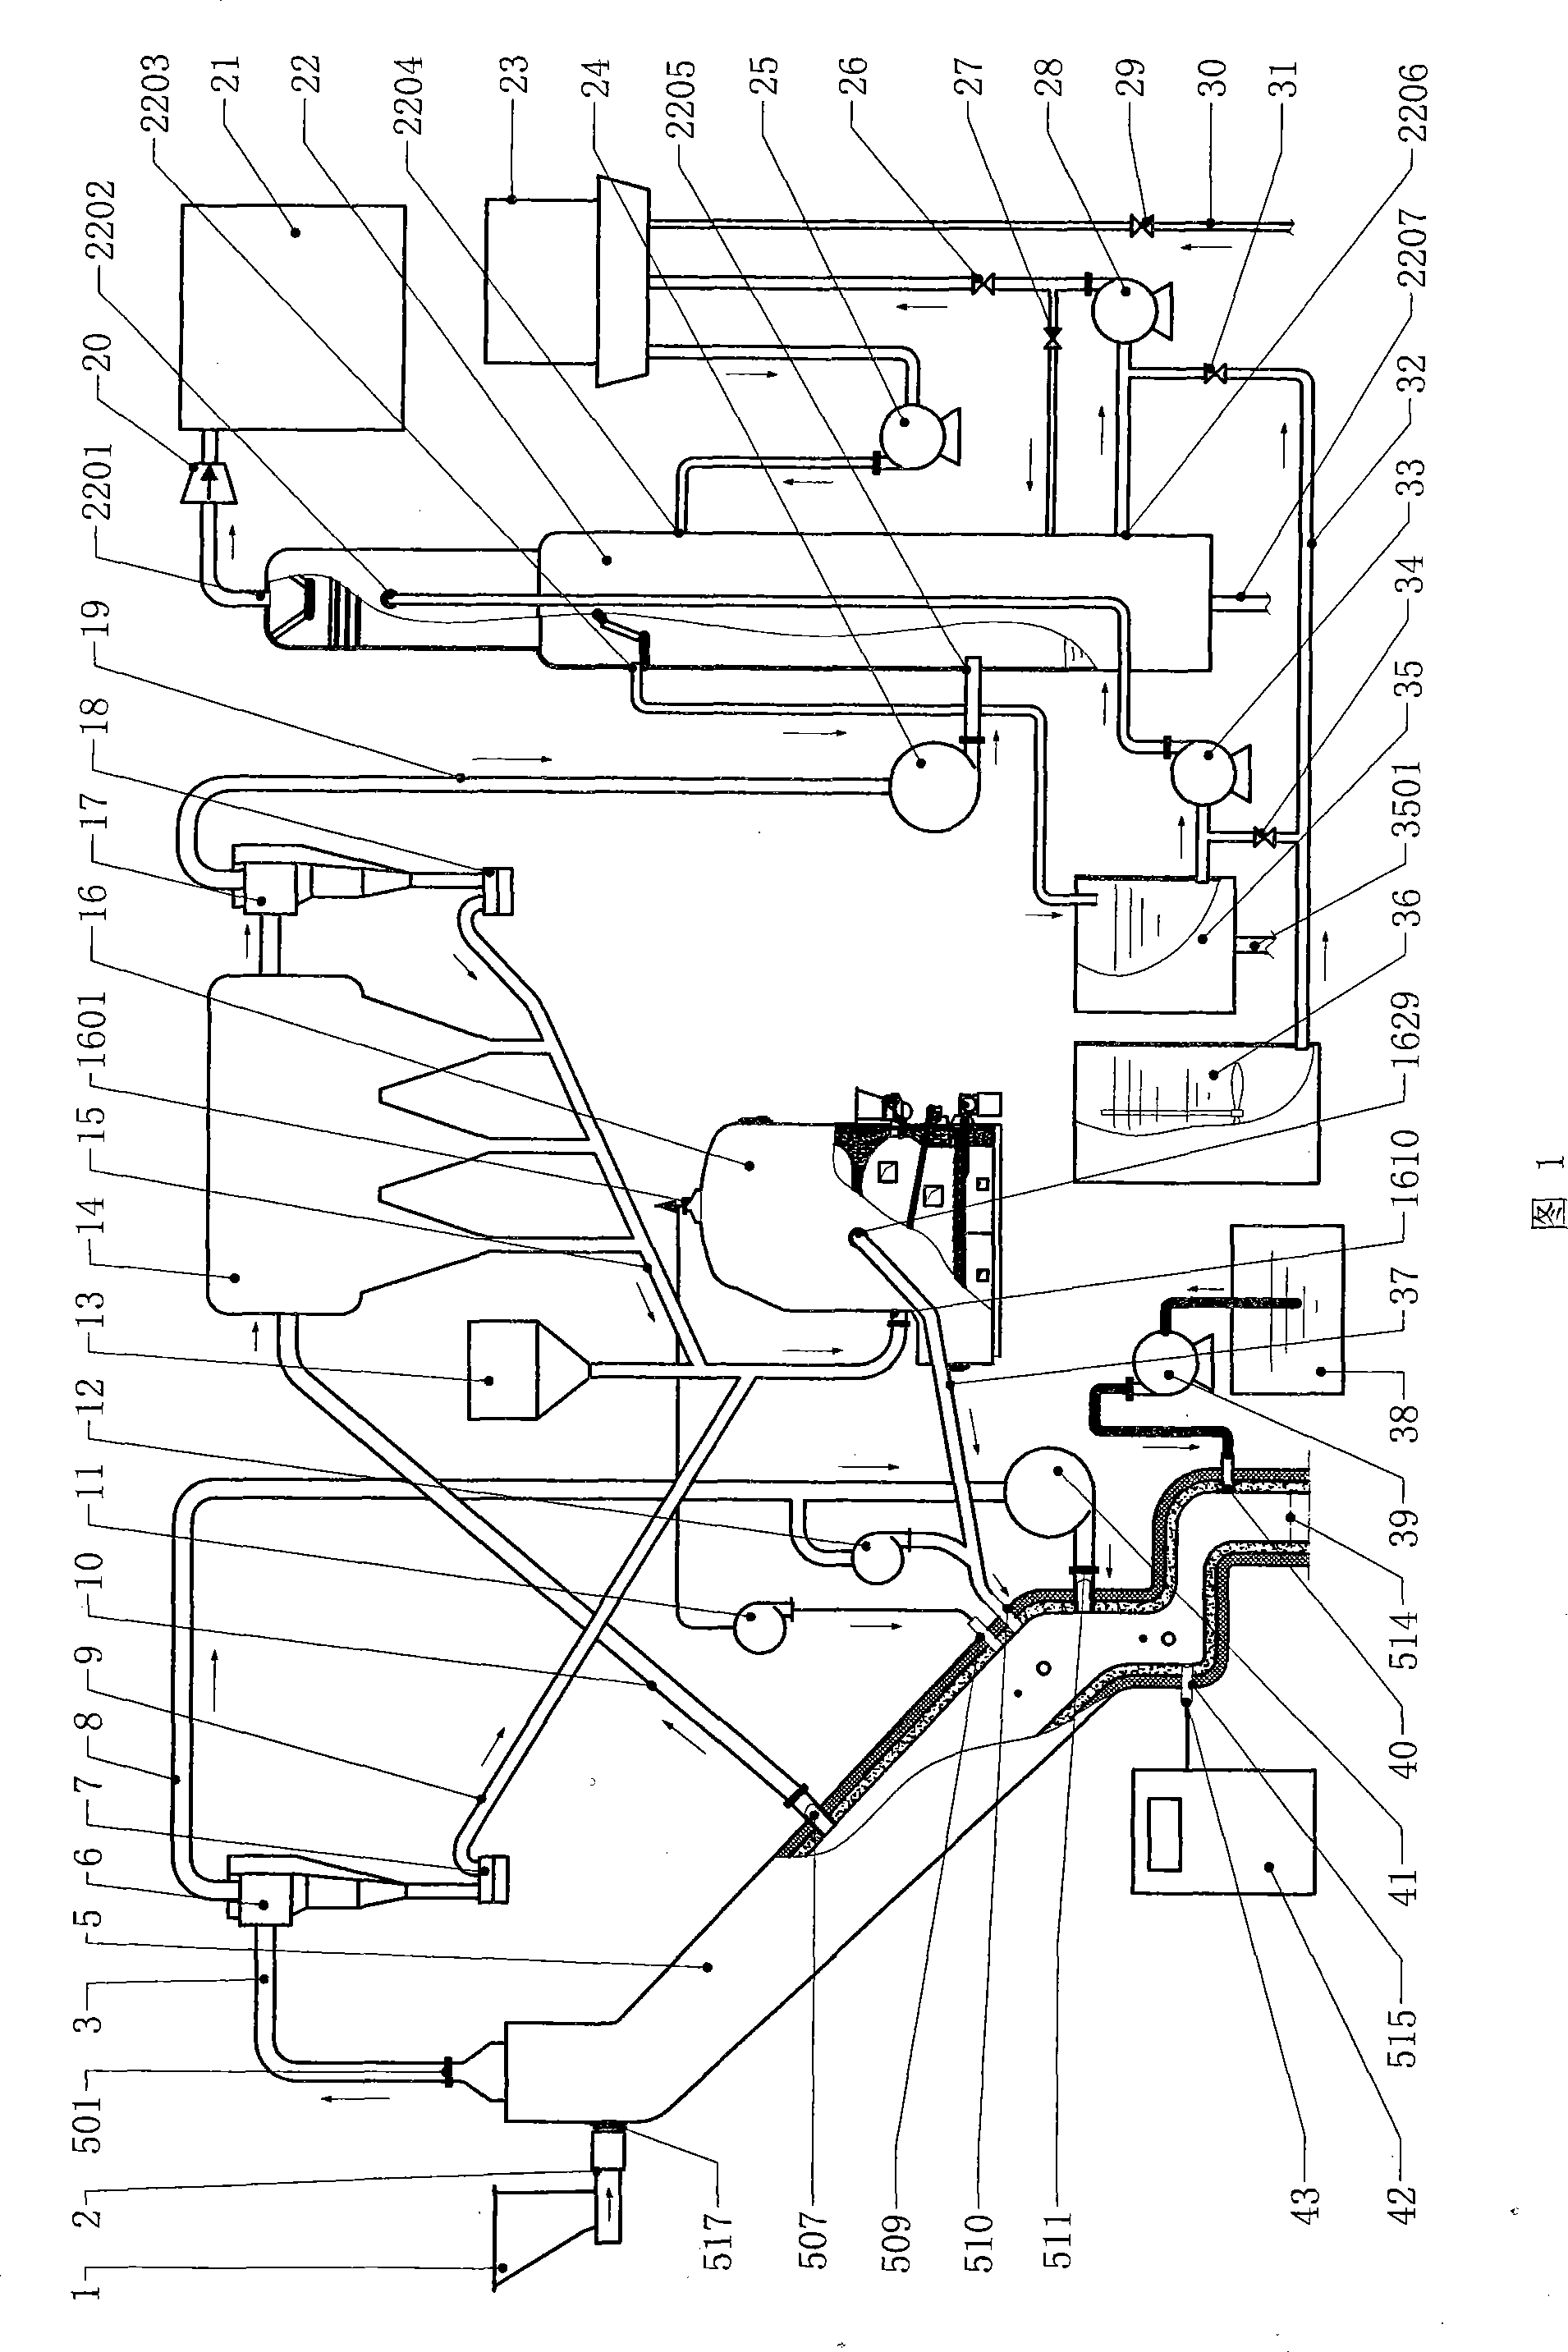 System and apparatus for producing synthesis gas from garbage and biomass raw material